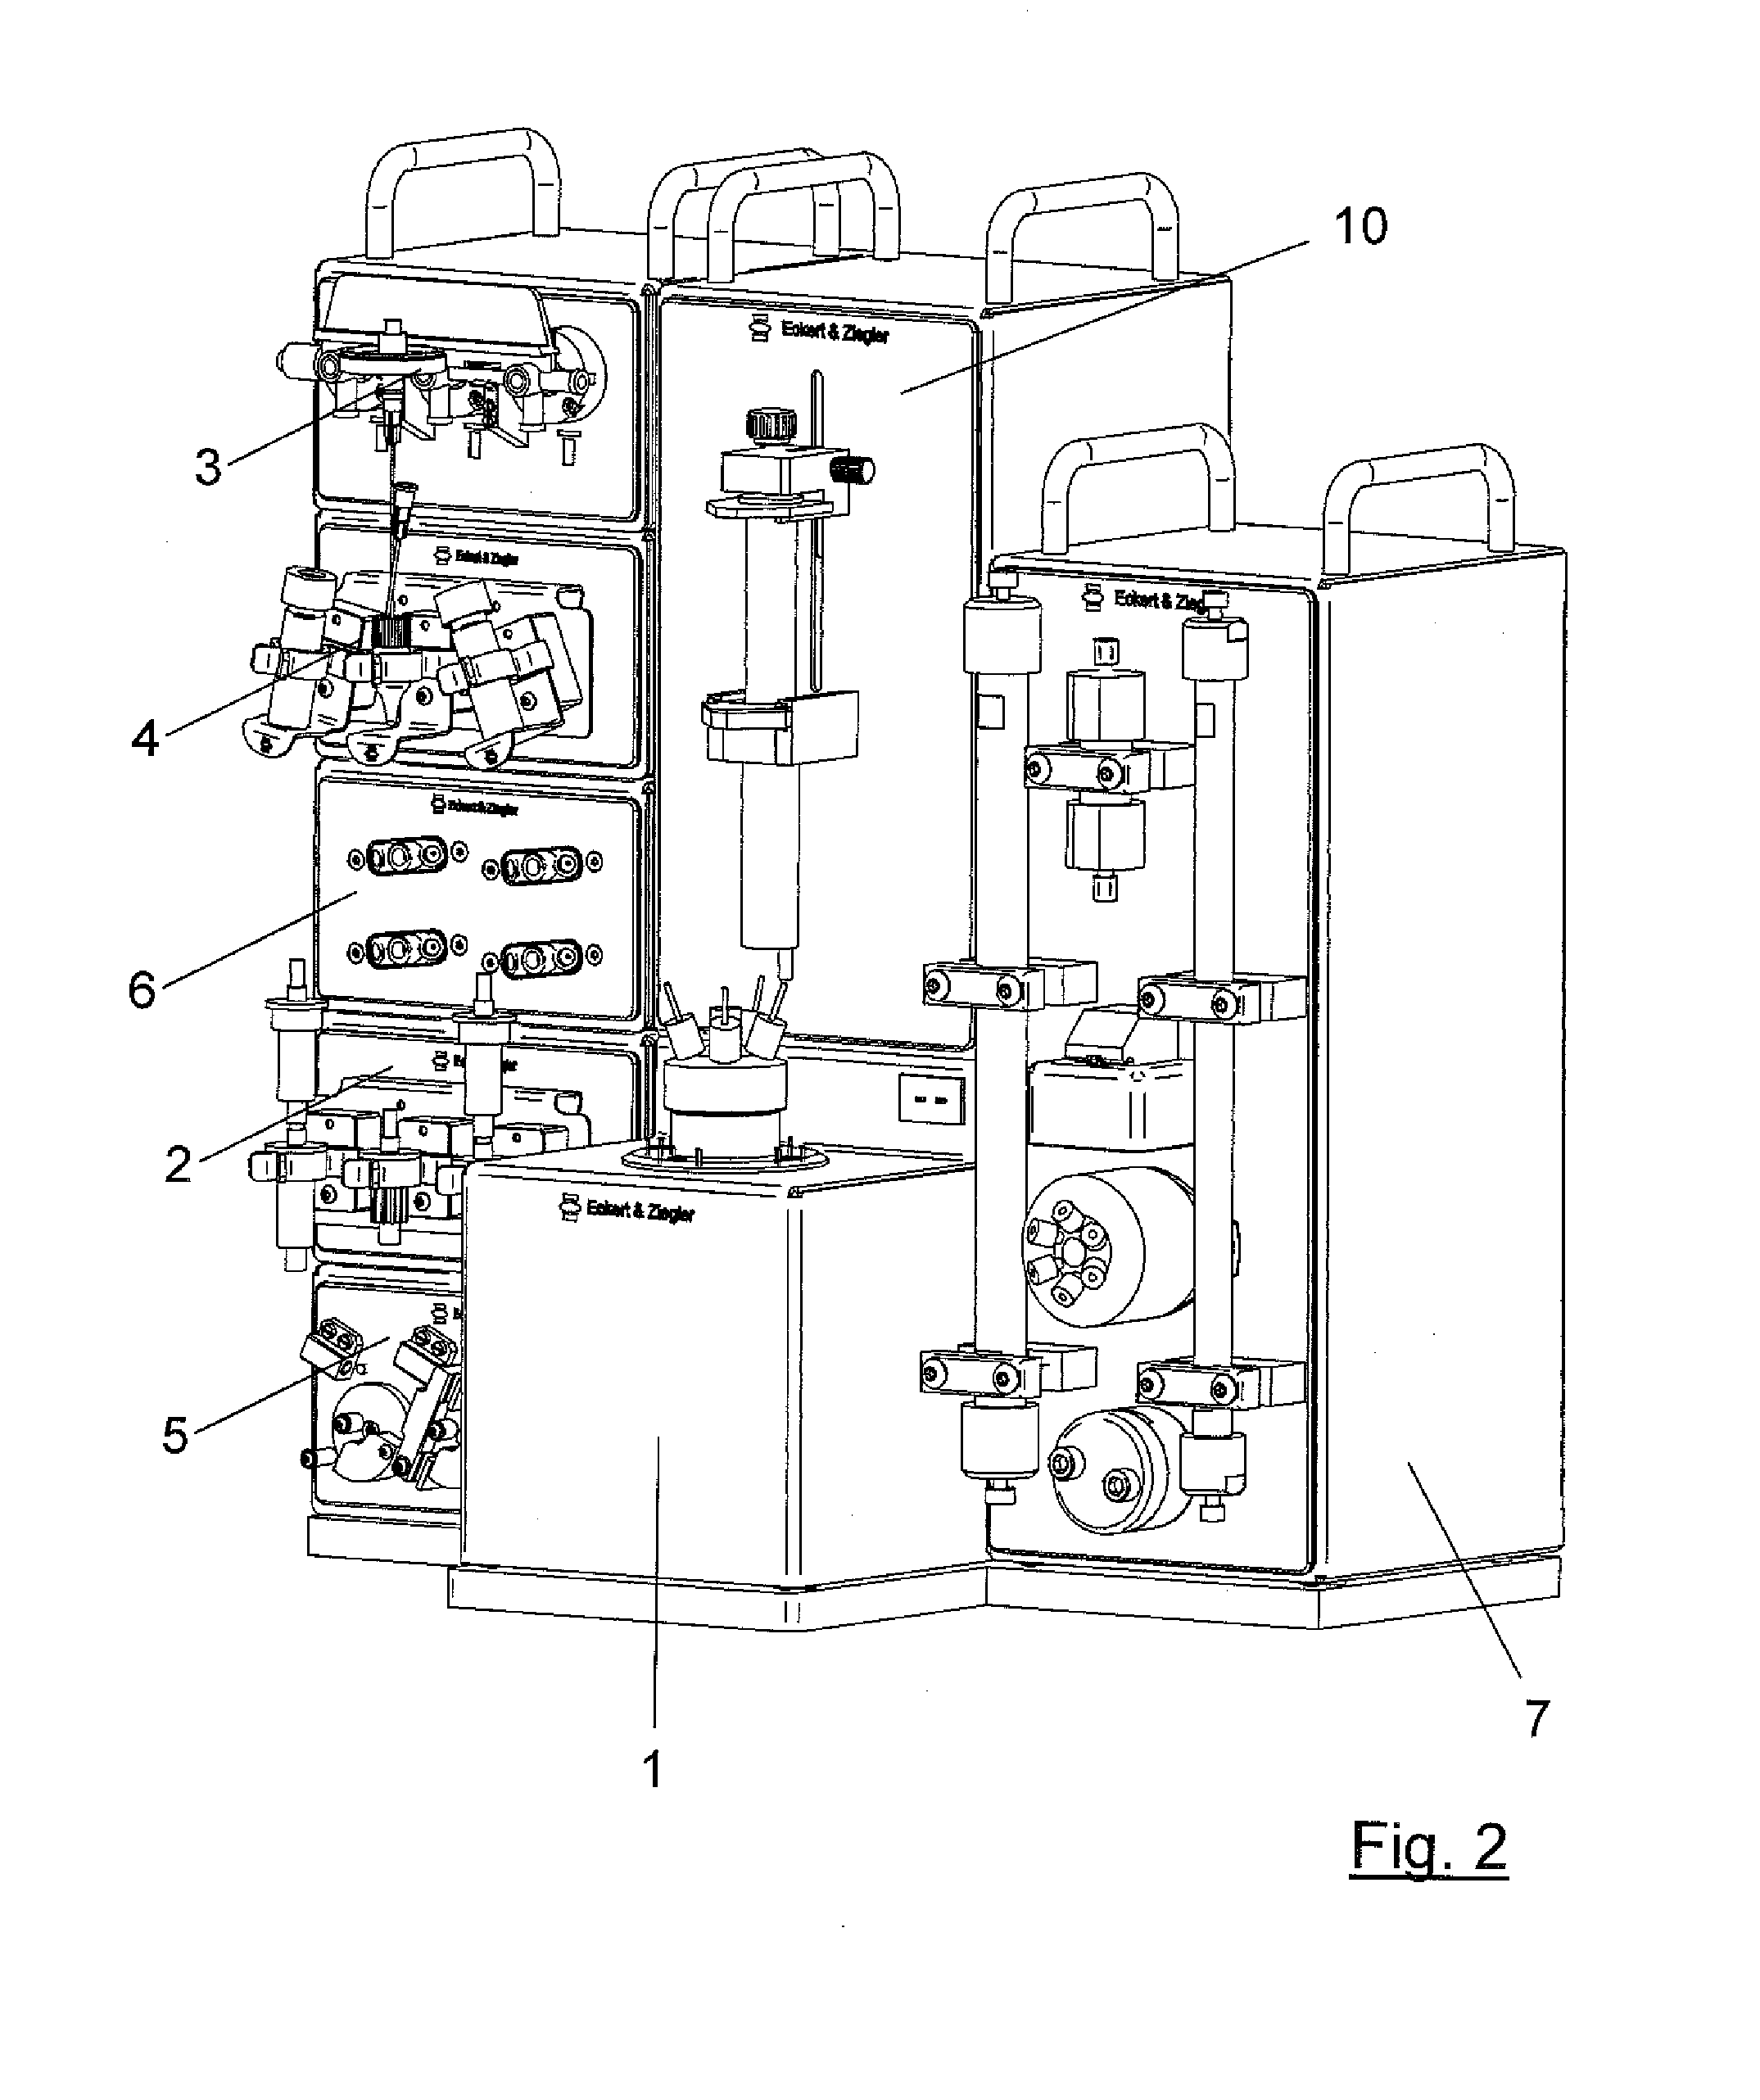 System and Method for Processing Chemical Substances, Computer Program for Controlling Such System, and a Corresponding Computer-Readable Storage Medium